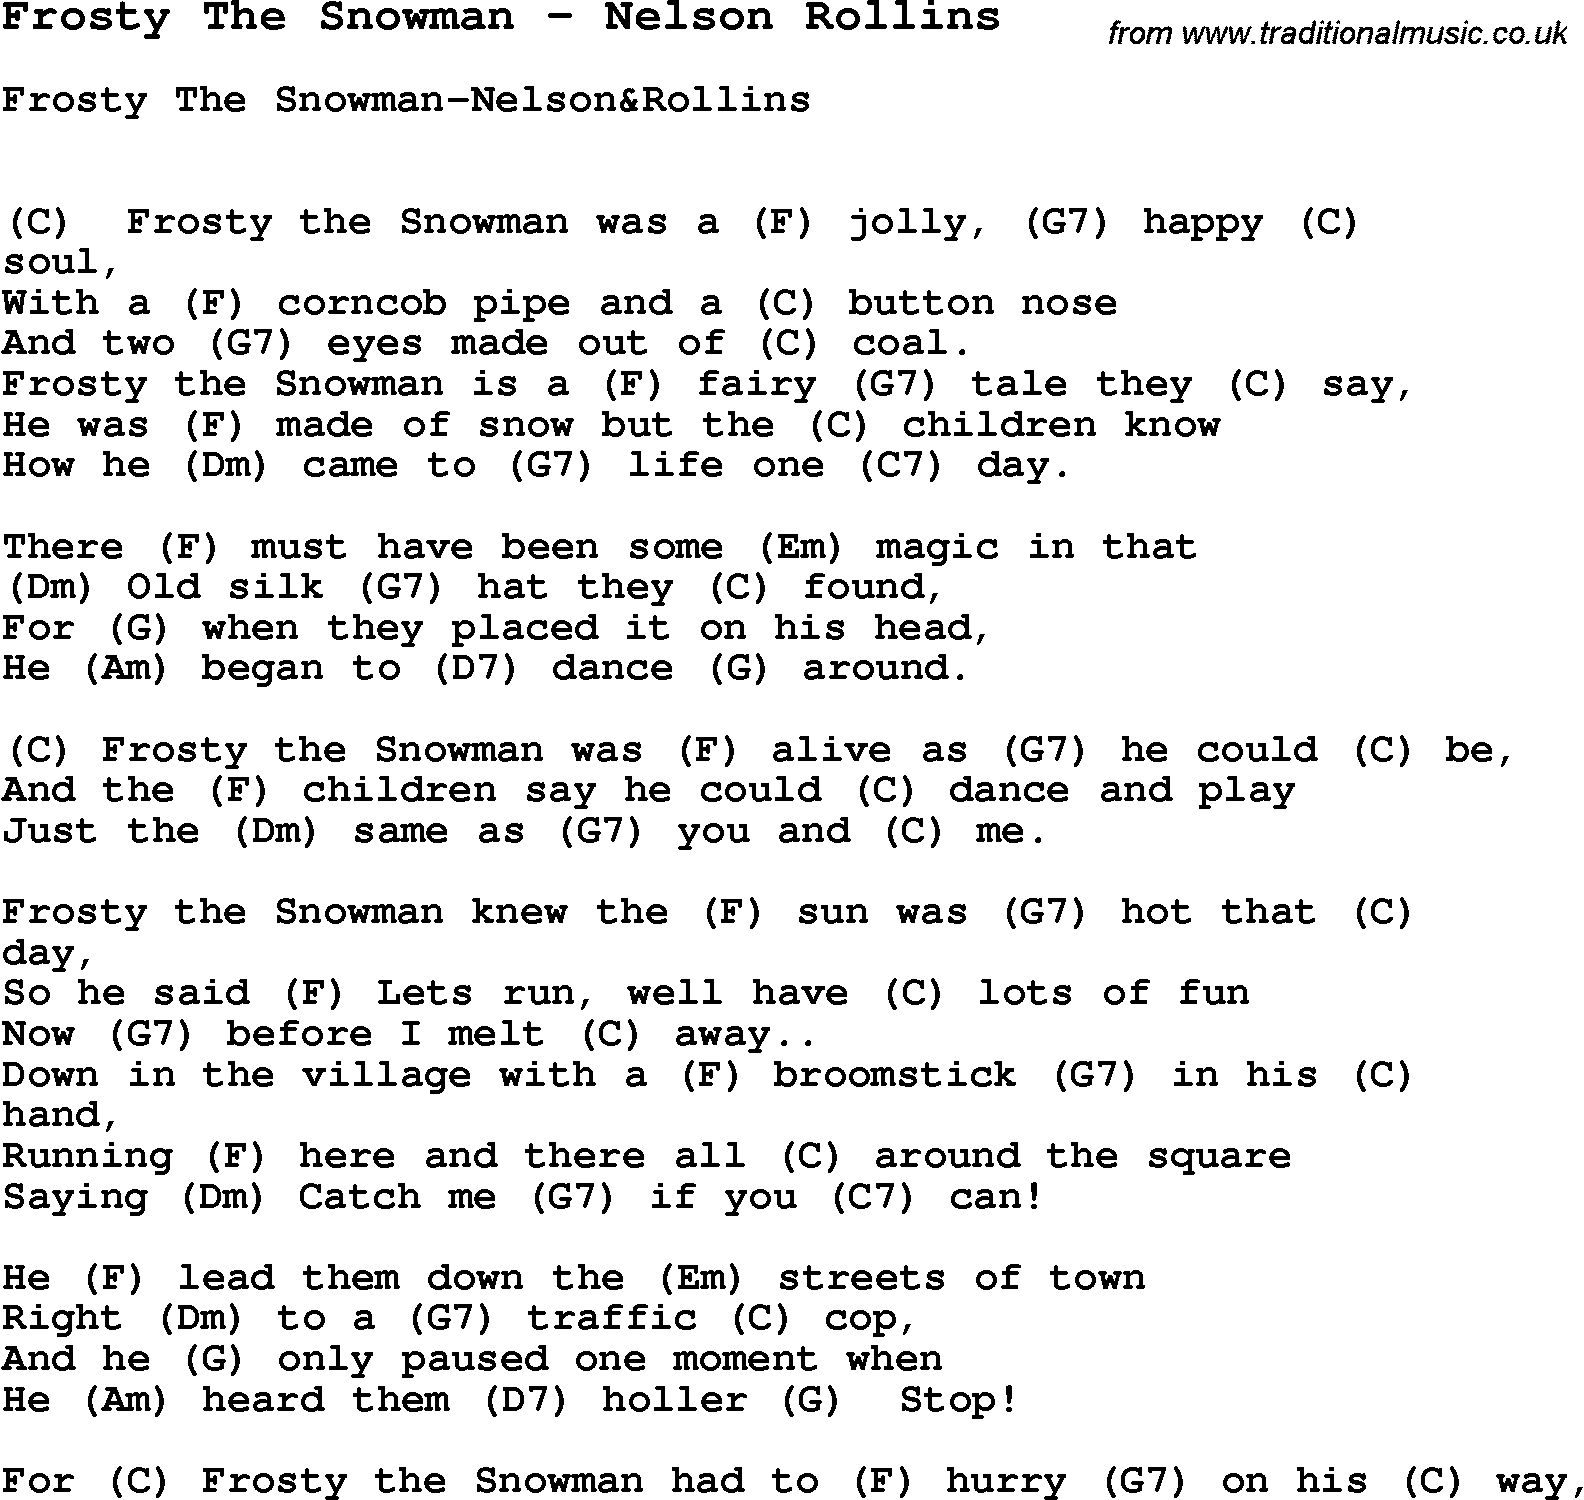 Song Frosty The Snowman by Nelson Rollins, with lyrics for vocal performance and accompaniment chords for Ukulele, Guitar Banjo etc.